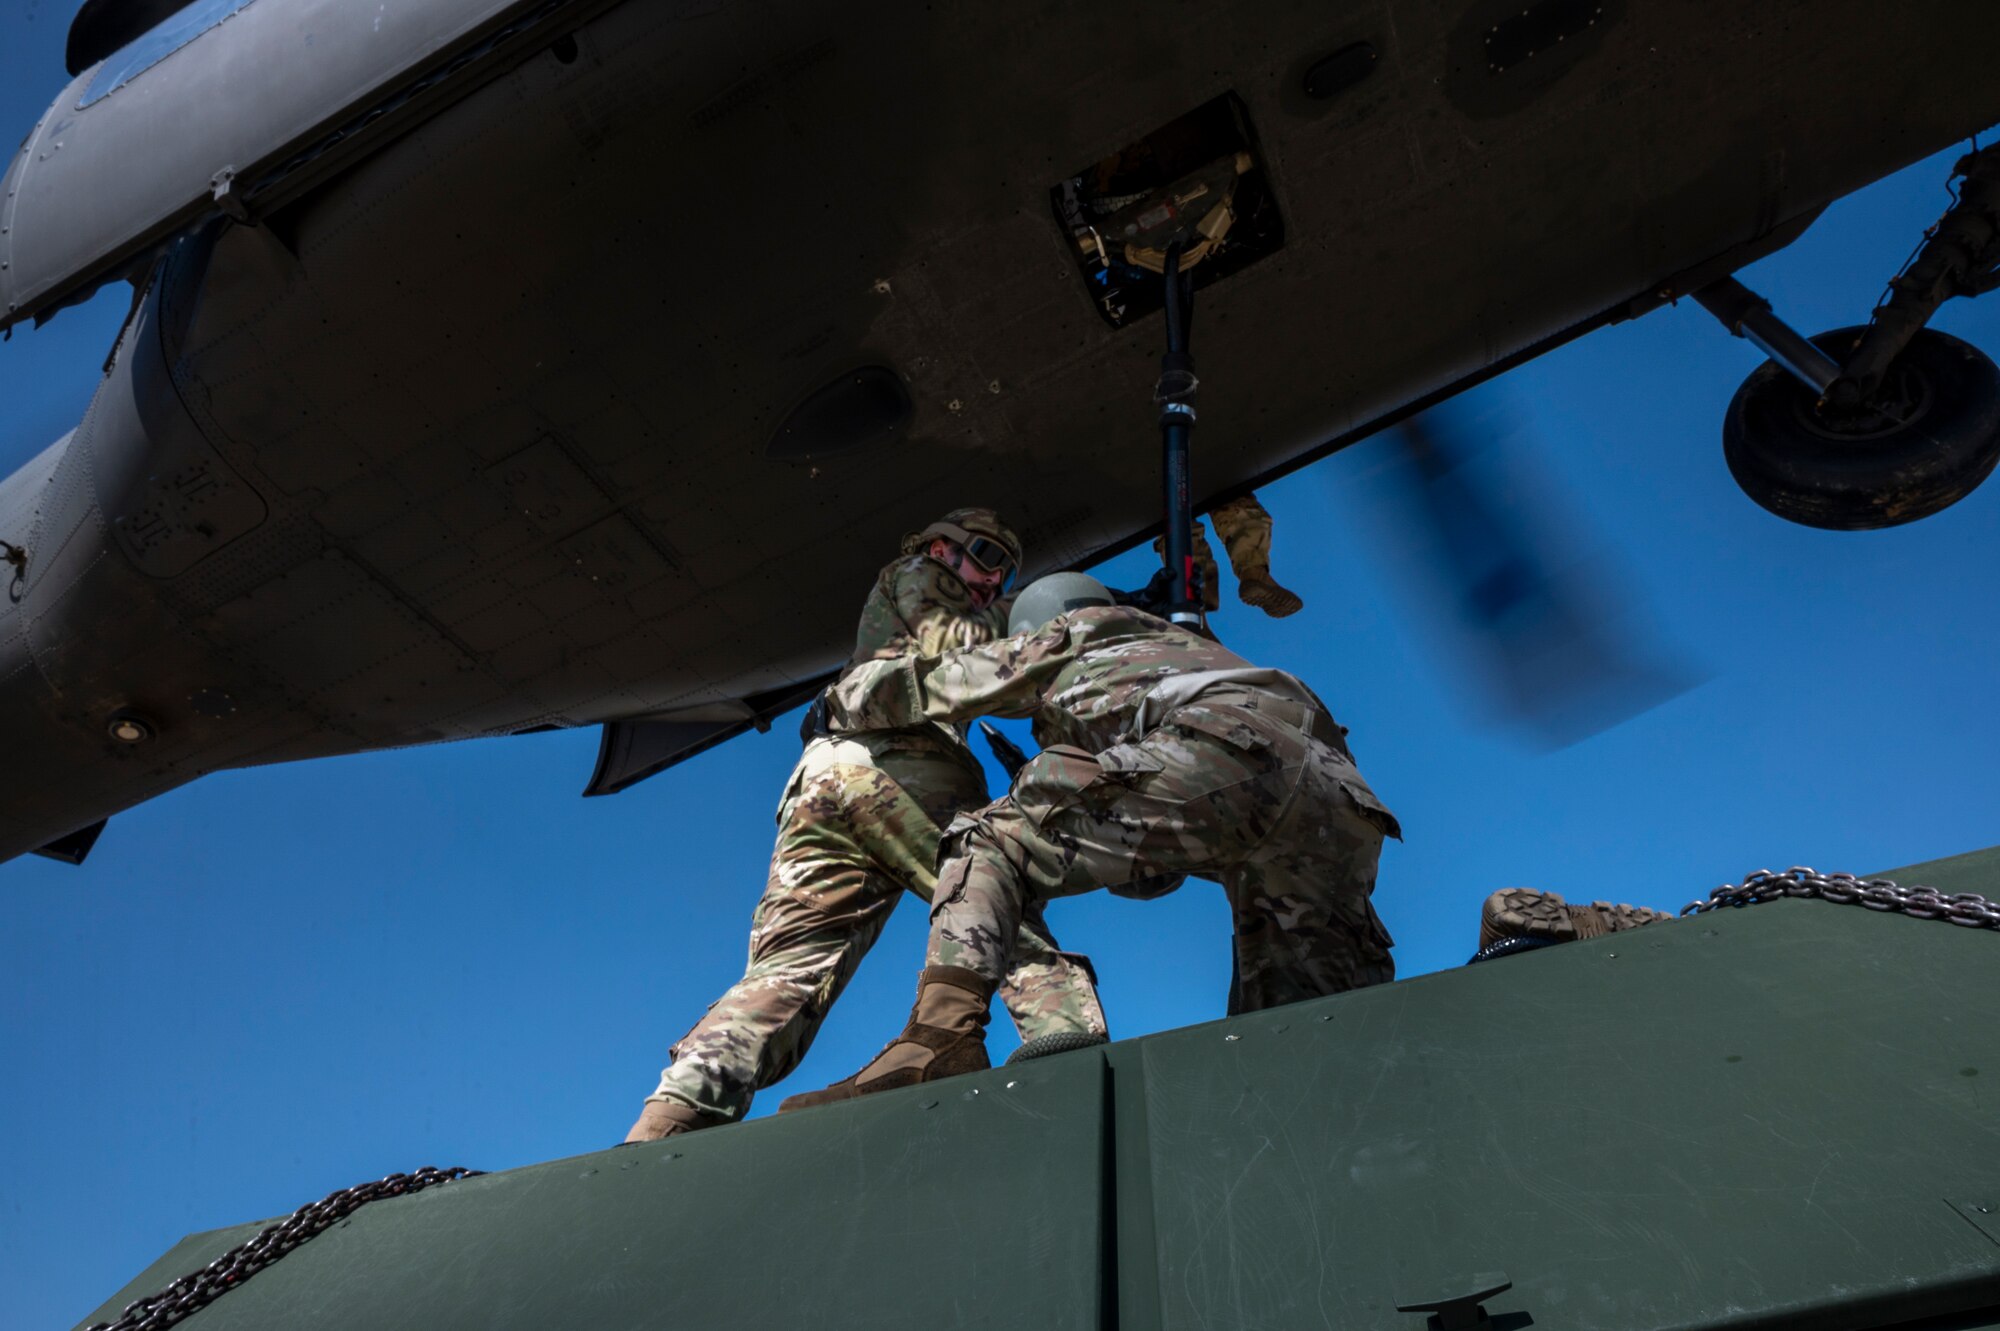 U.S. Air Force Staff Sgts. Miles Euro, 51st Munitions Squadron munitions operations supervisor, and Shelbie Morris, aerospace ground equipment technician, secures cargo to a U.S. Army Black Hawk helicopter during an integrated sling load training at Osan Air Base, Oct. 13, 2022.